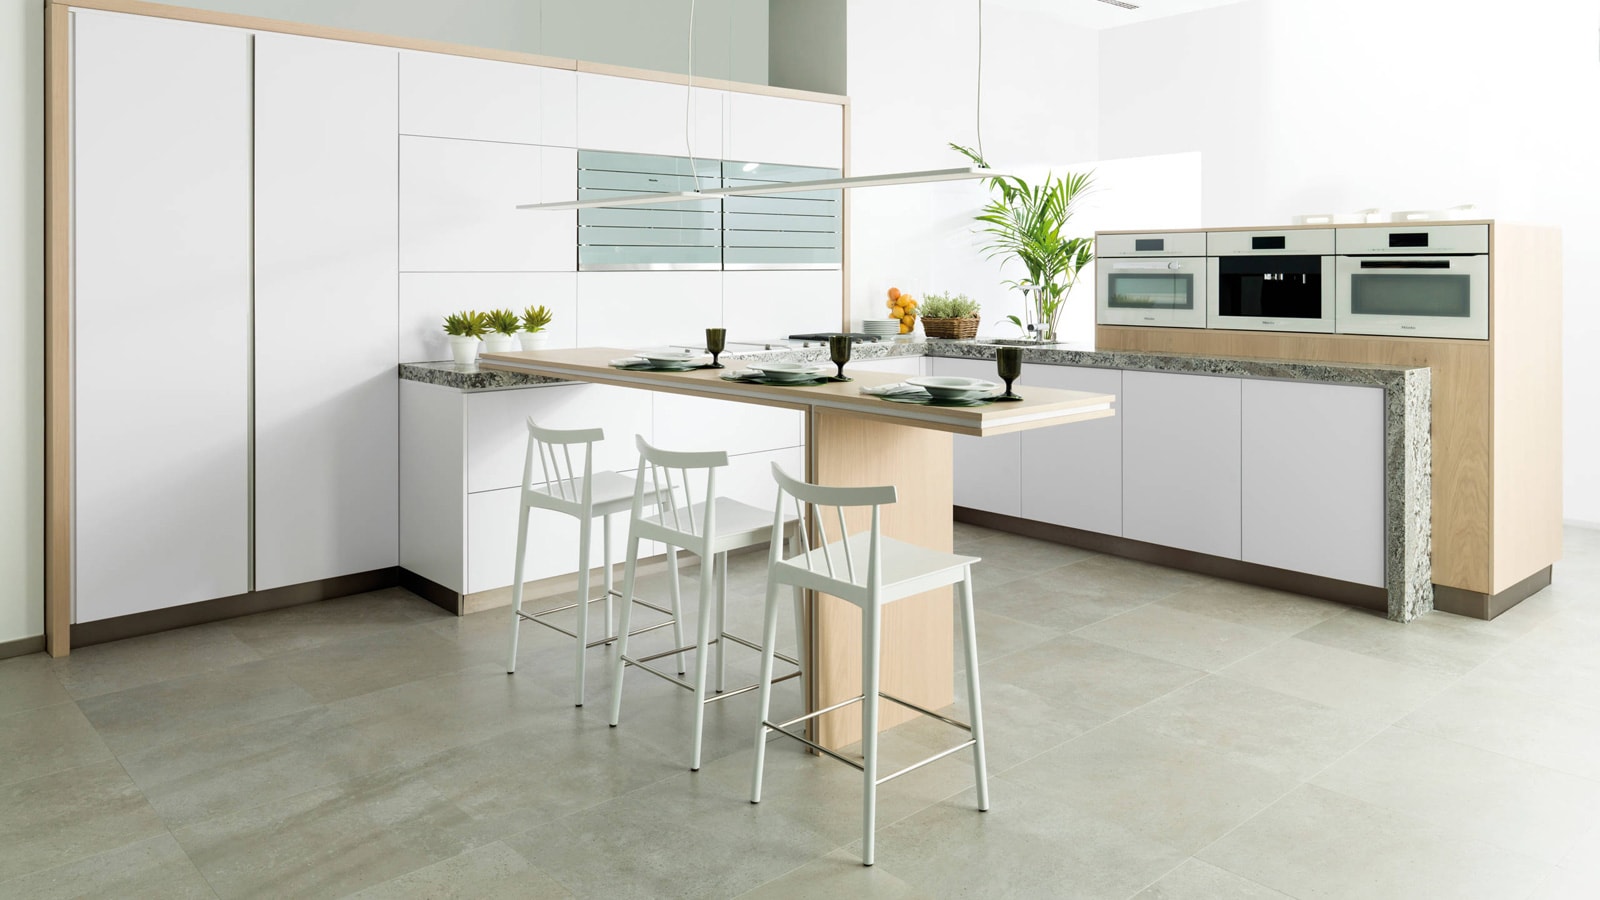 Modern kitchens: the perfect balance of design and practicality